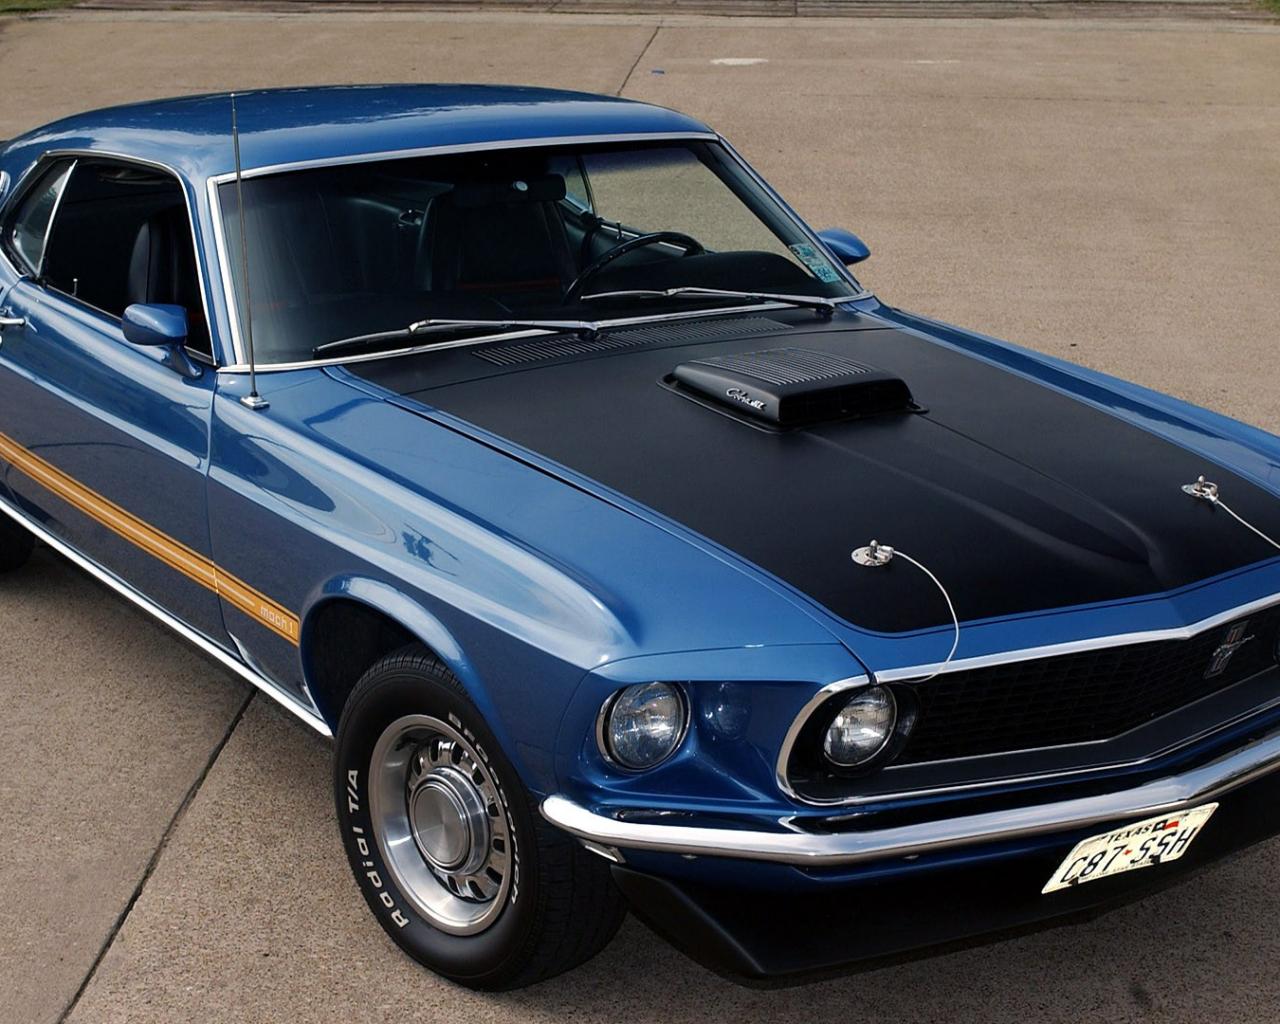 Ford Mustang Mach 1, 1280x1024